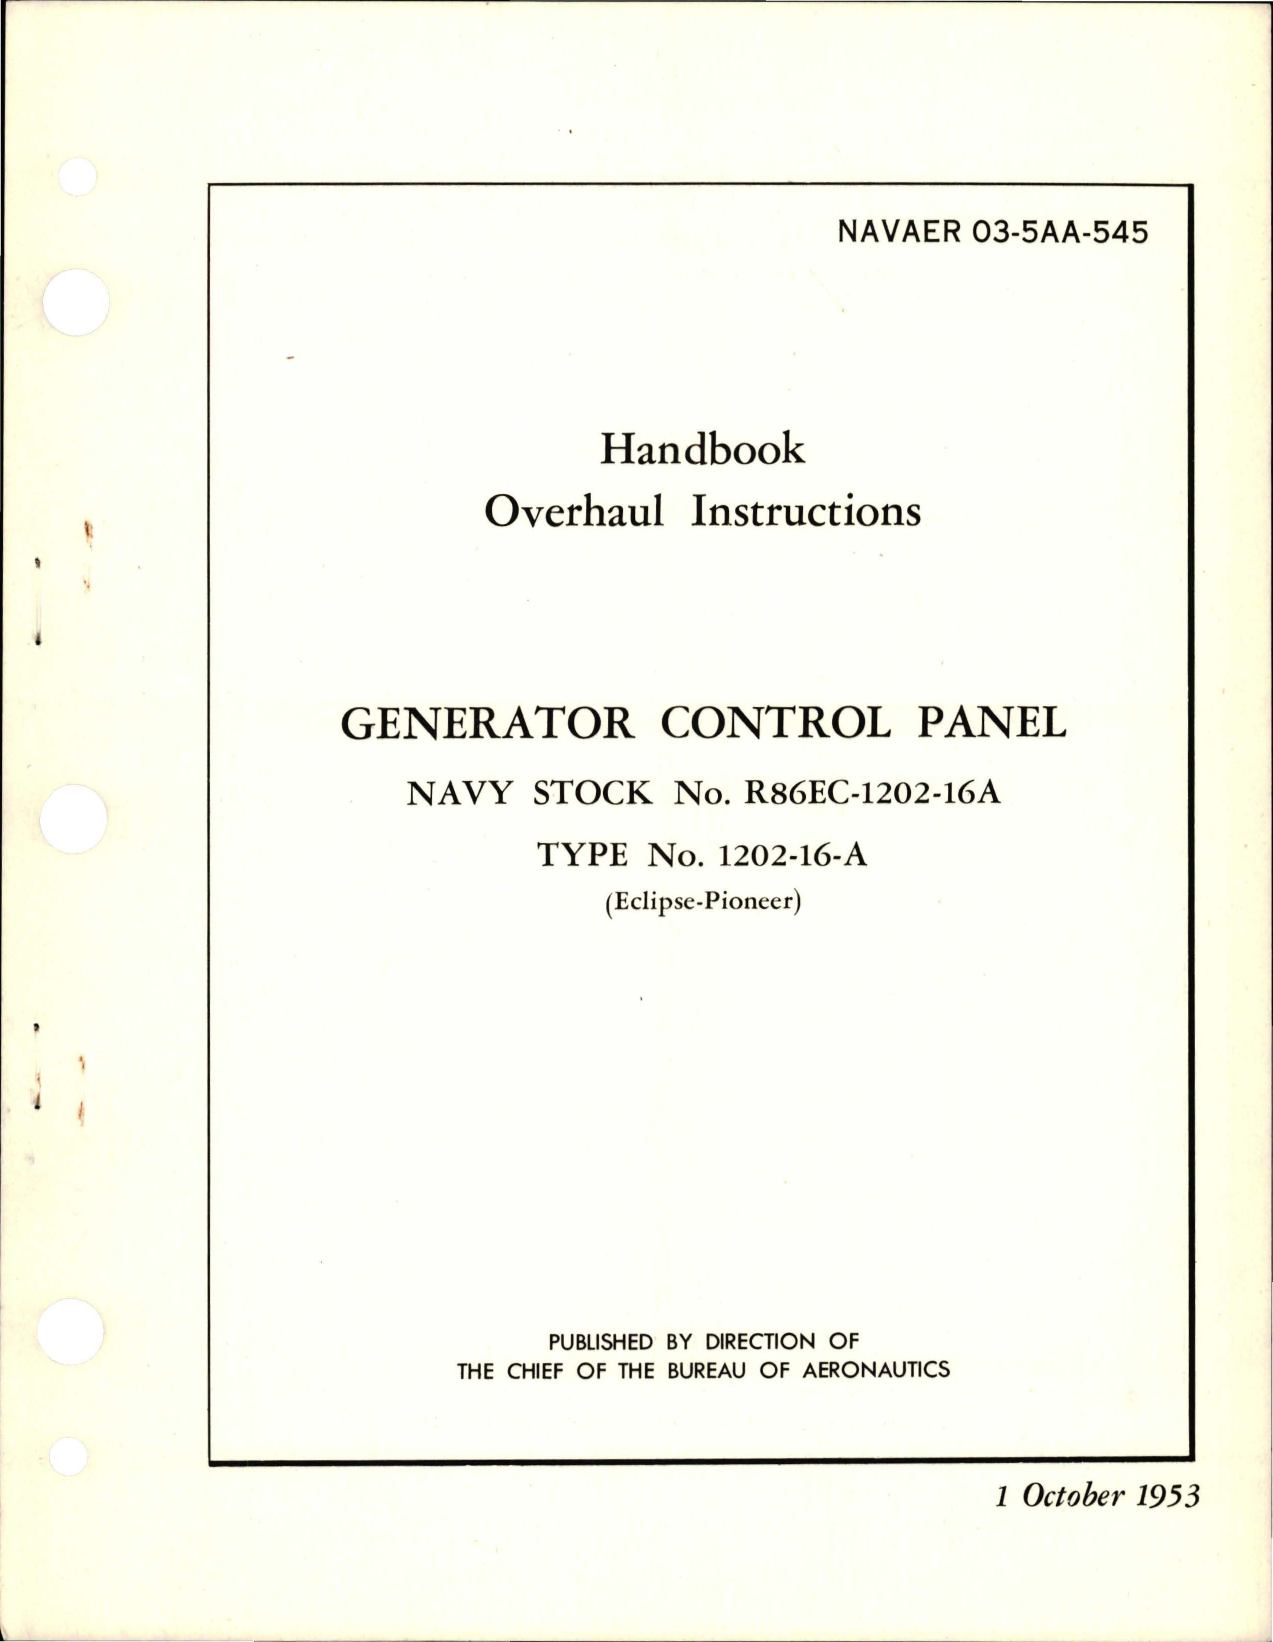 Sample page 1 from AirCorps Library document: Overhaul Instructions for Generator Control Panel - Type 1202-16-A